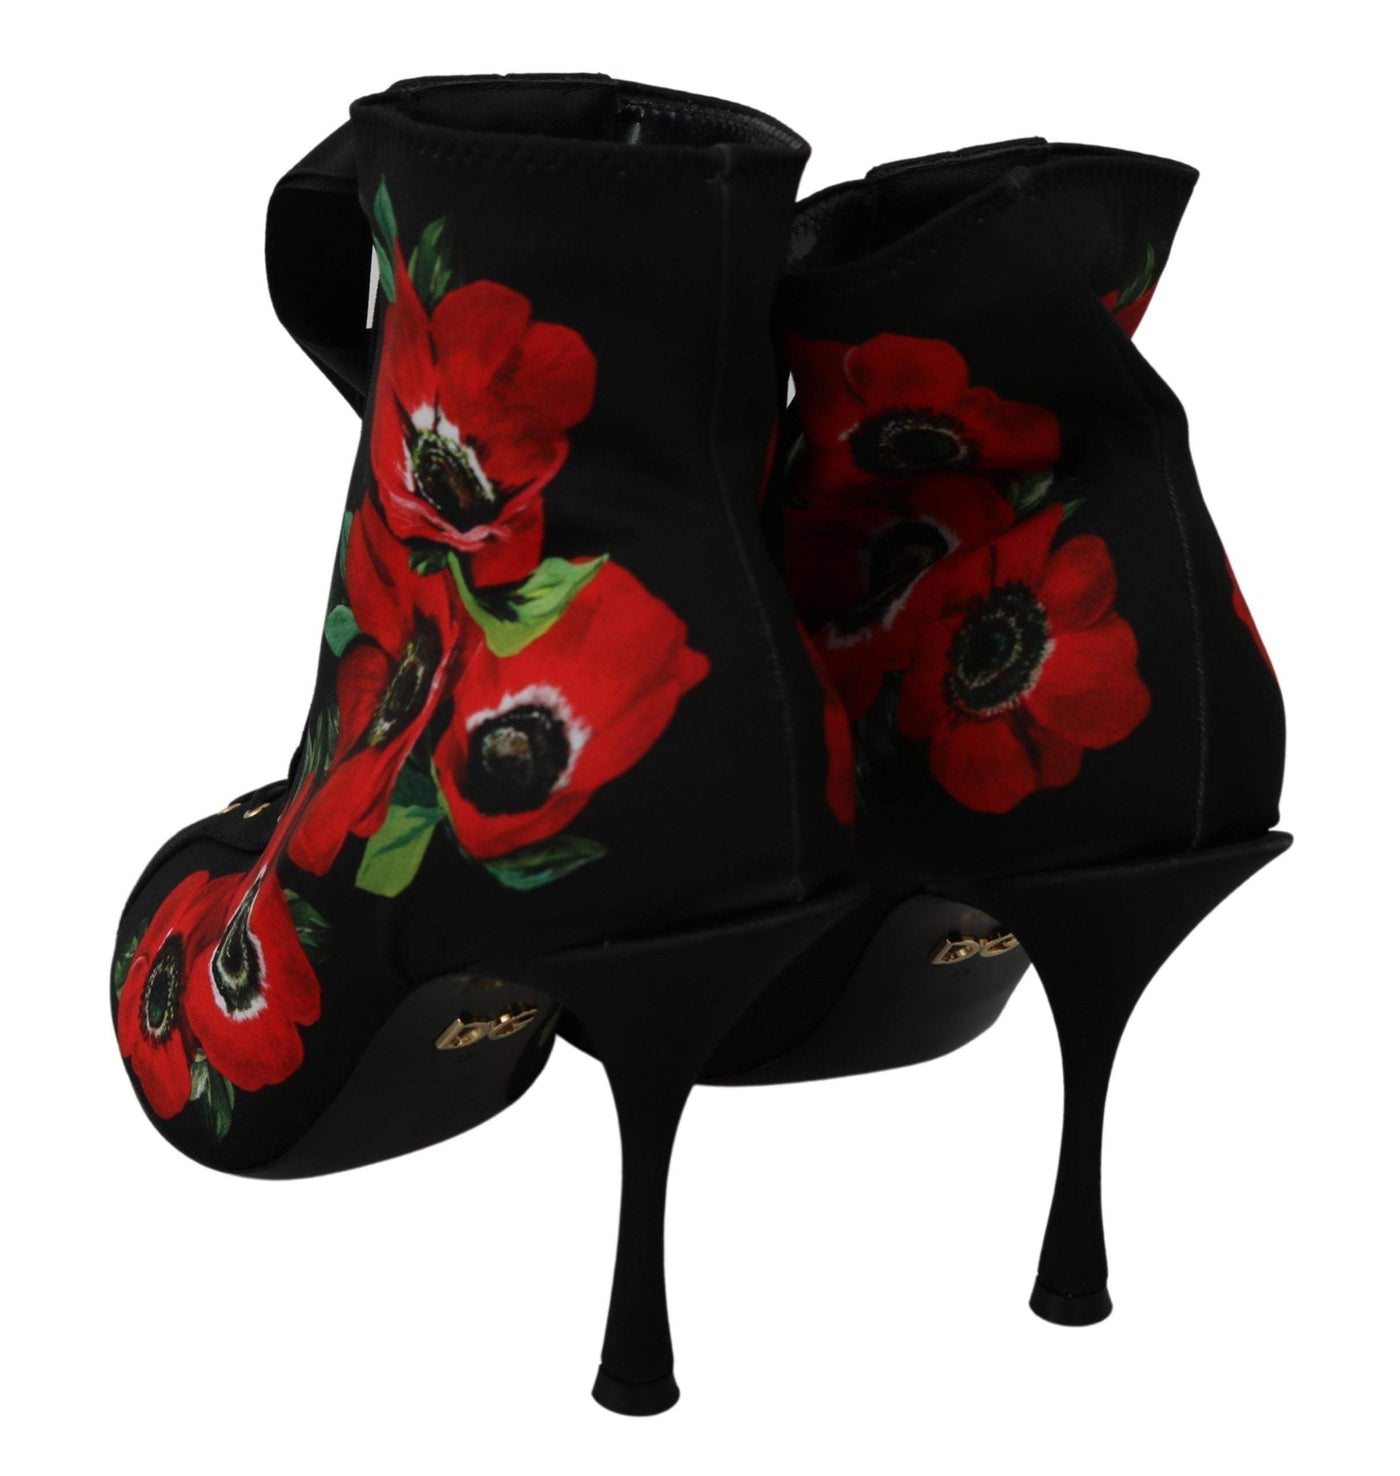 Dolce & Gabbana Black Red Roses Ankle Booties Shoes #women, Black and Red, Boots - Women - Shoes, Dolce & Gabbana, EU35/US4.5, EU36/US5.5, feed-agegroup-adult, feed-color-Black, feed-gender-female, Shoes - New Arrivals at SEYMAYKA